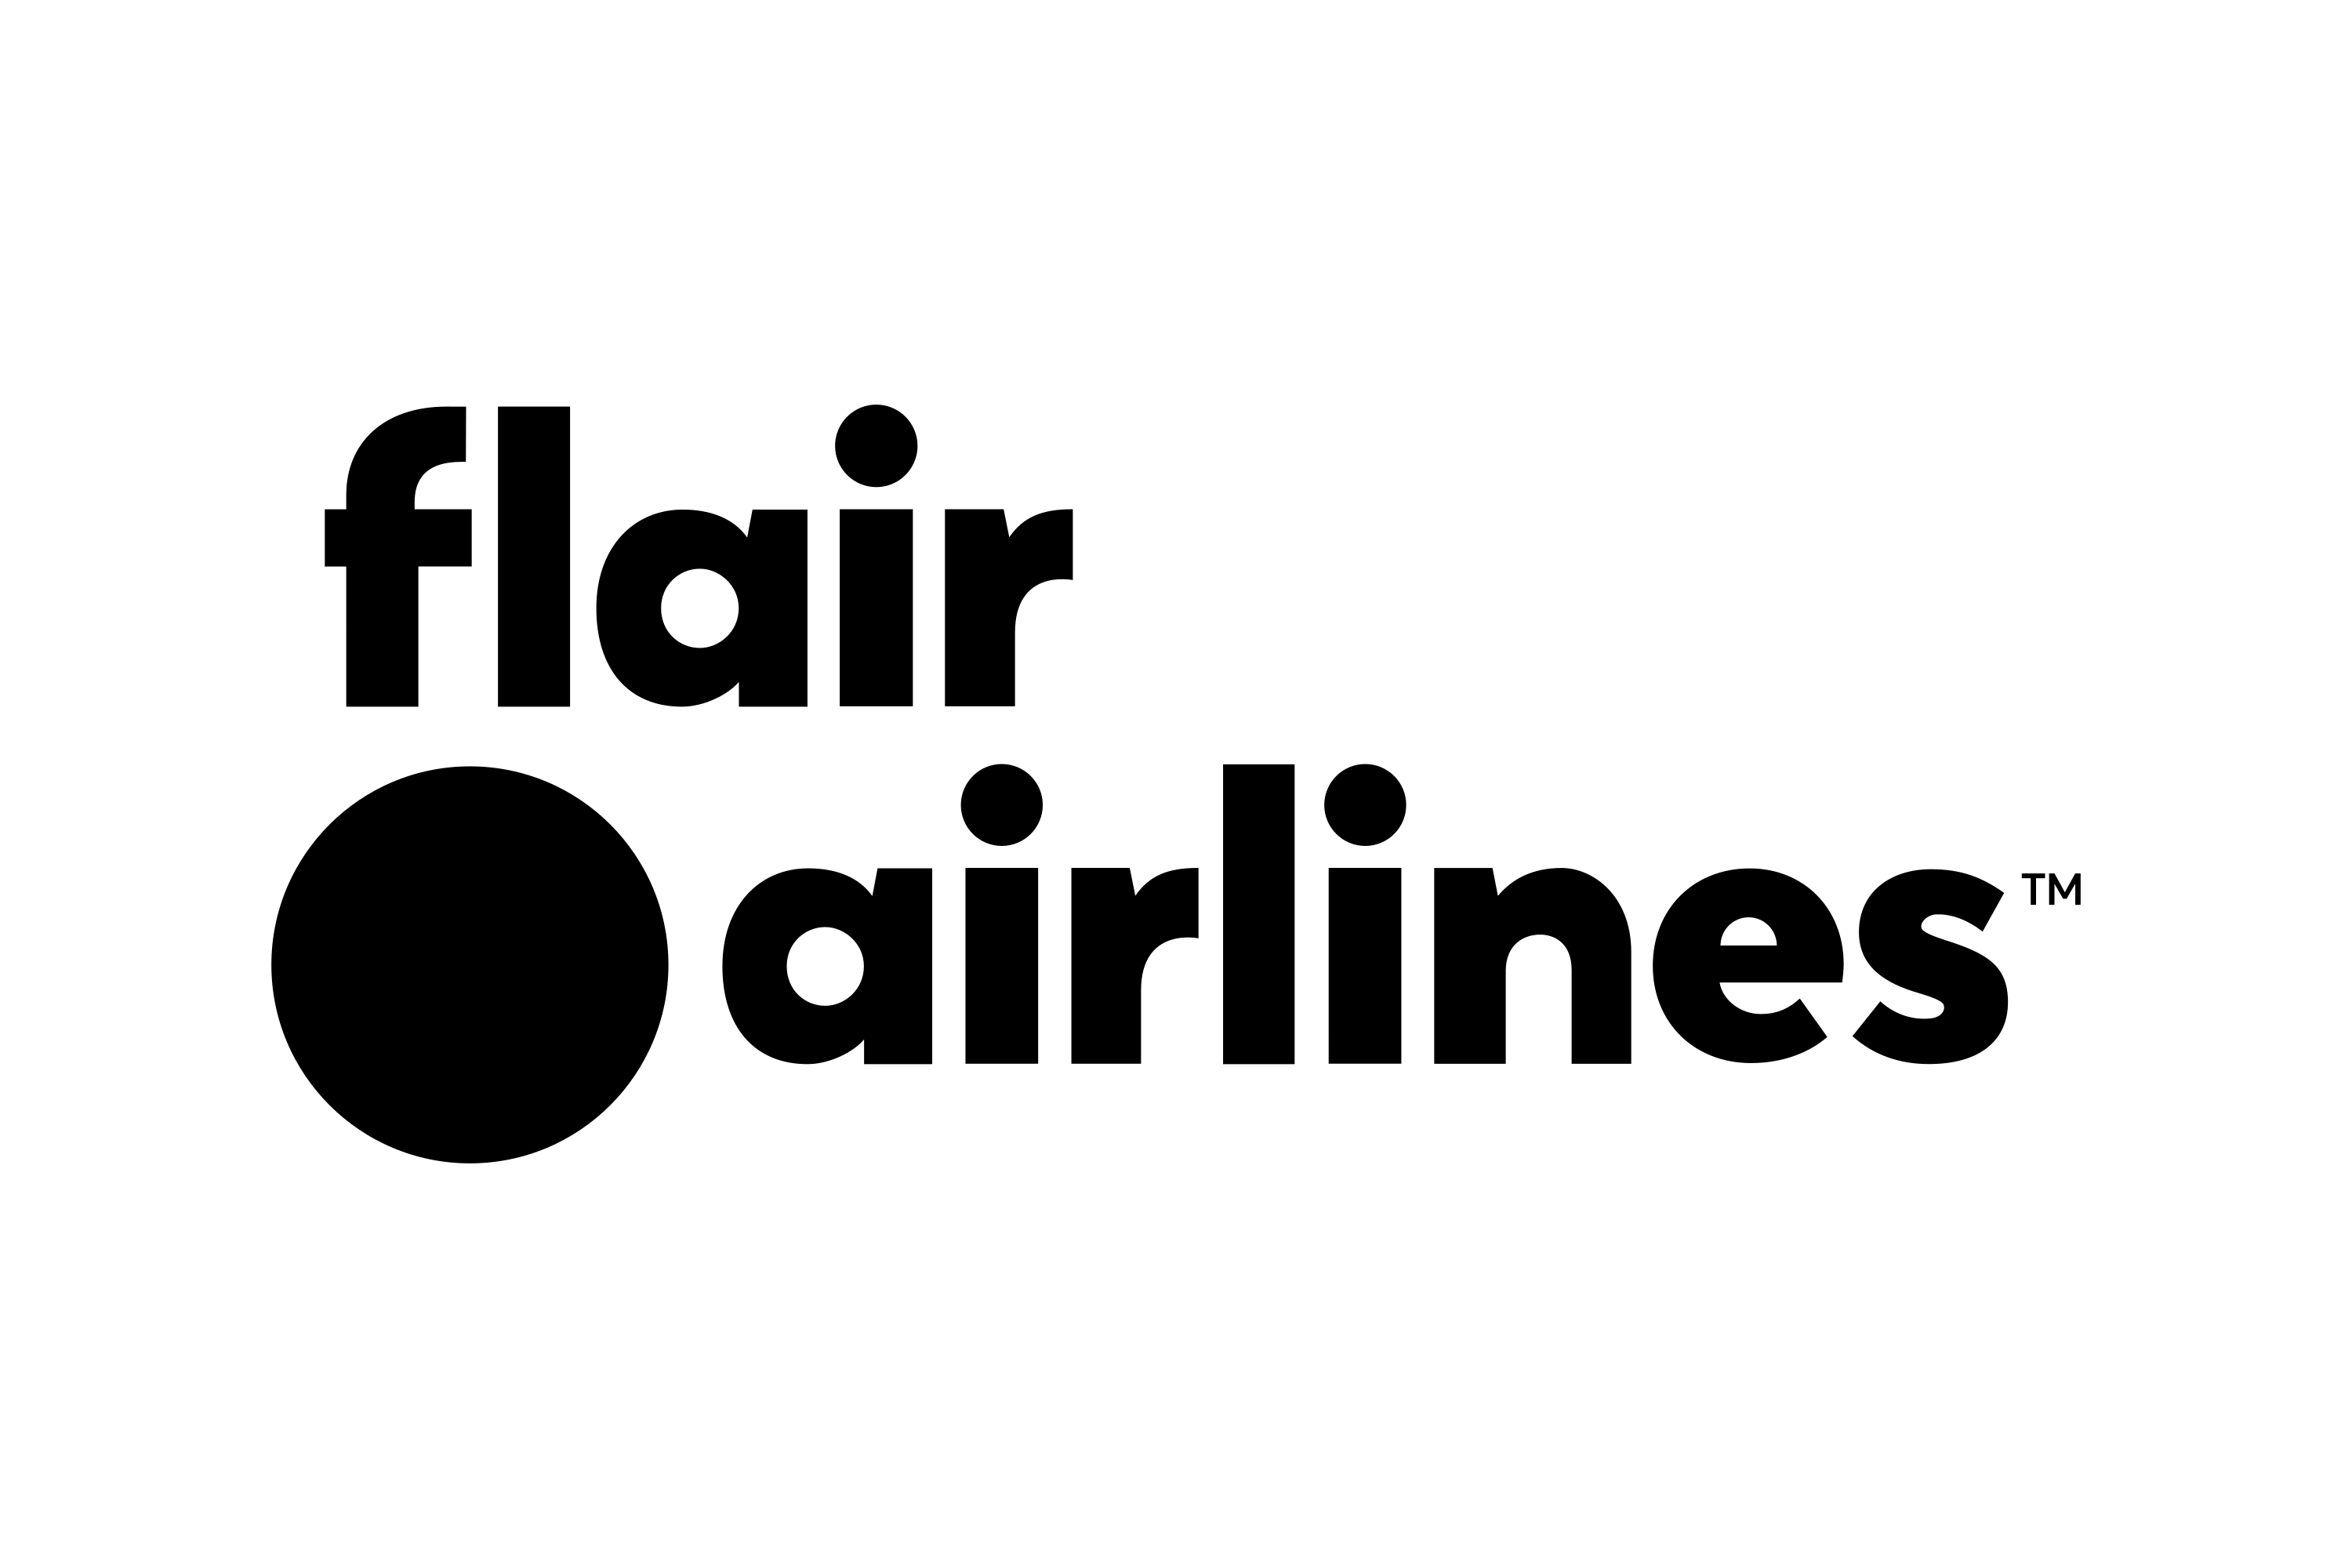 Download Flair Airlines Logo in SVG Vector or PNG File Format - Logo.wine